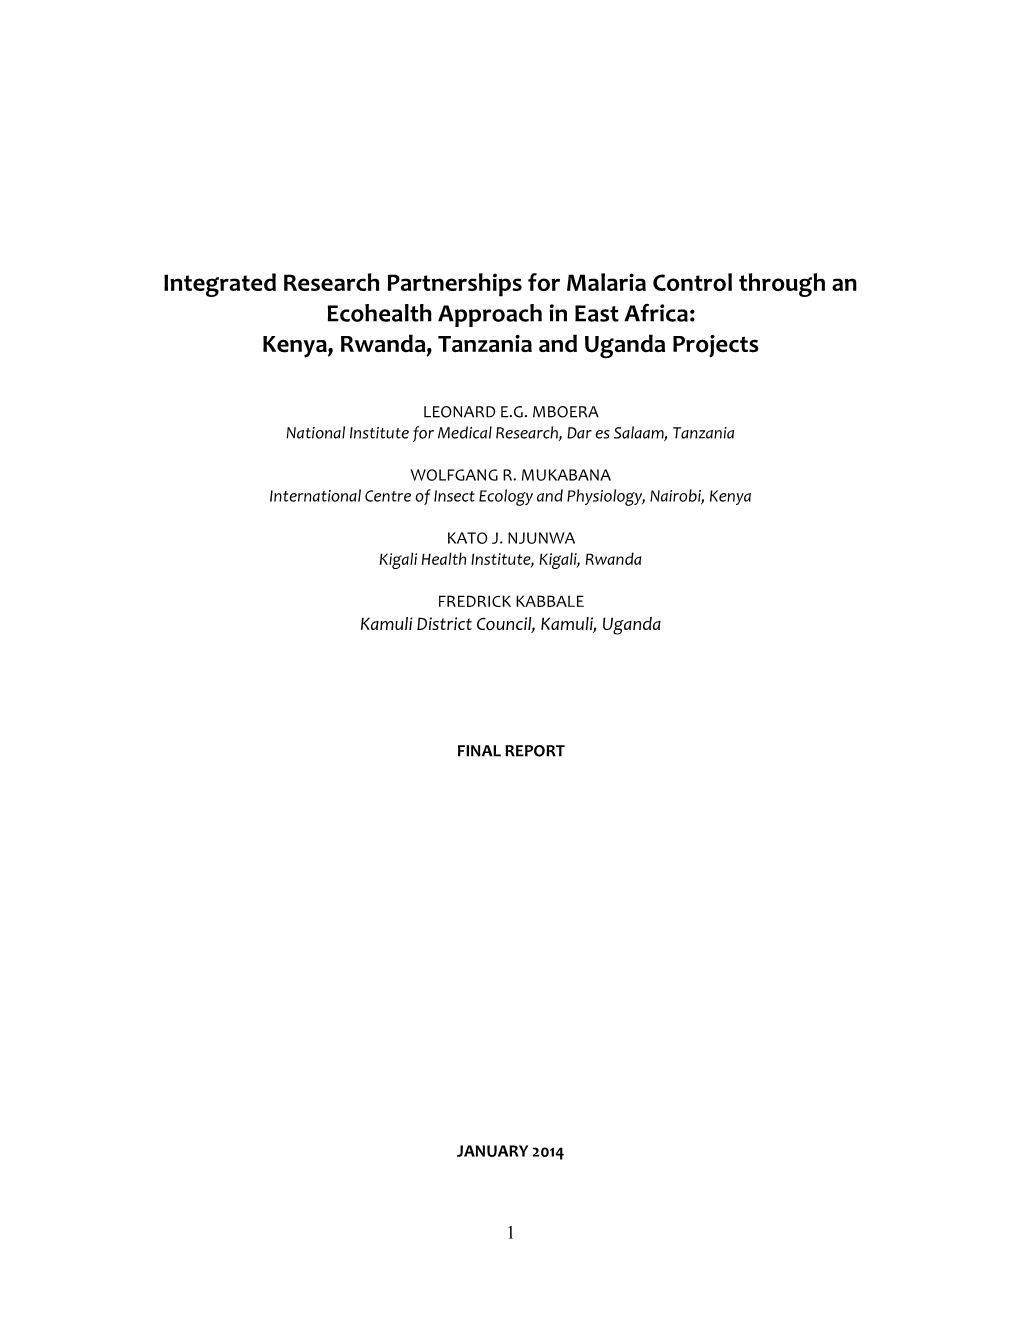 Integrated Research Partnerships for Malaria Control Through an Ecohealth Approach in East Africa: Kenya, Rwanda, Tanzania and Uganda Projects